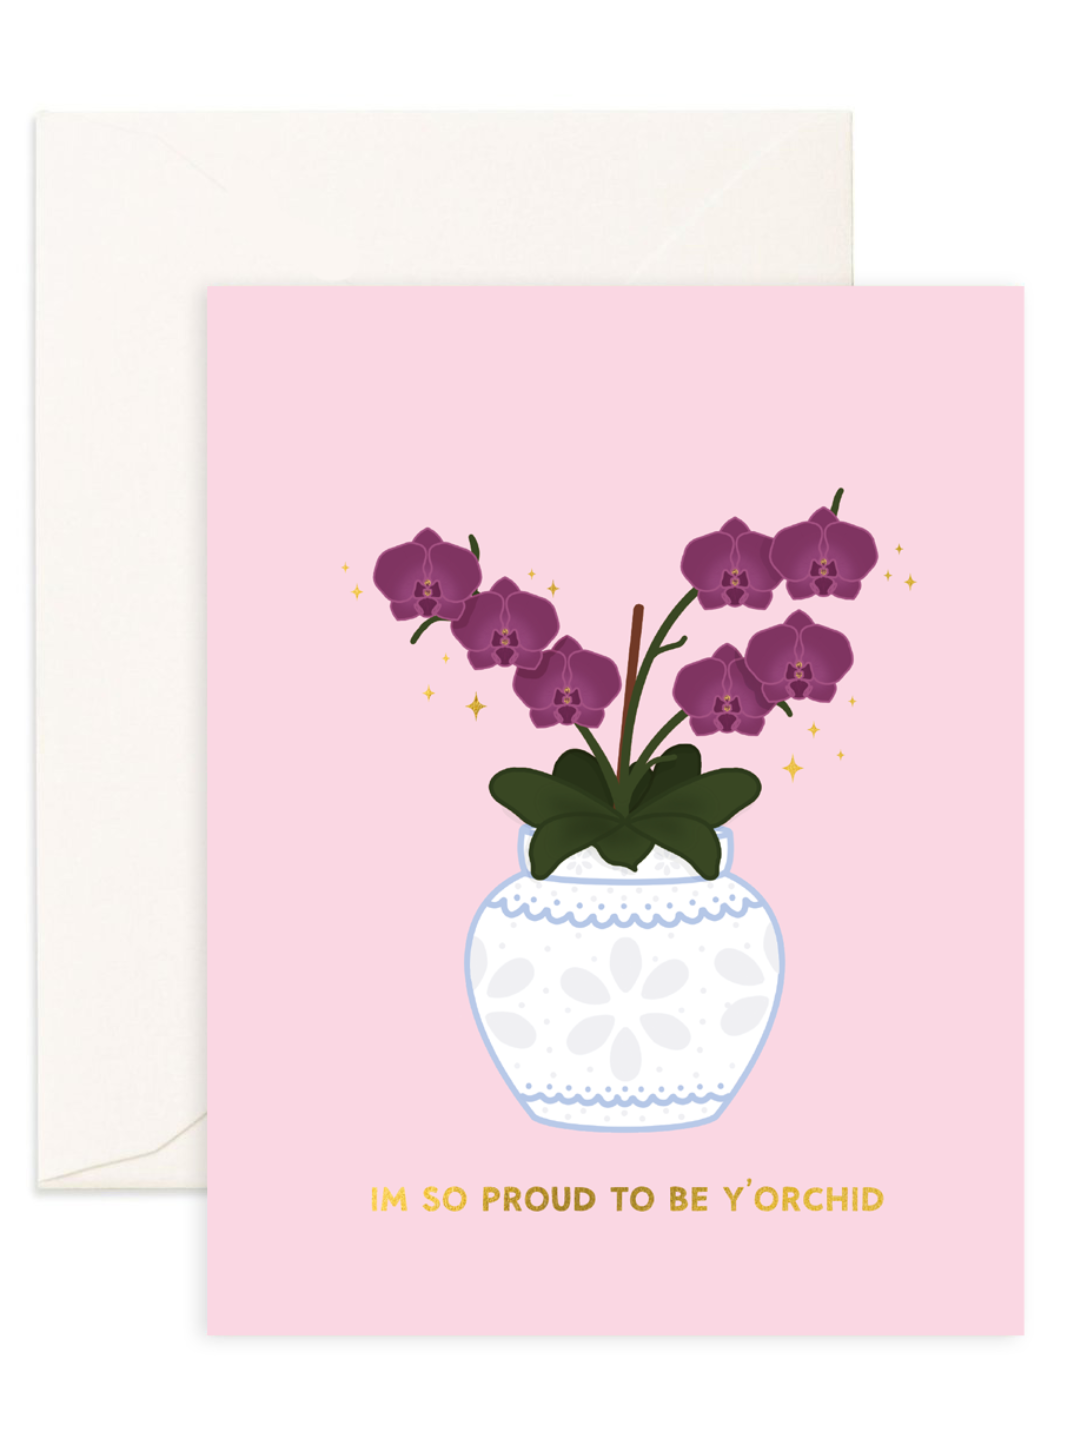 Eco-friendly greeting card printed on recycled paper cute food-inspired design shop sustainable ethical brands women-owned brands kind on the planet orchid flower